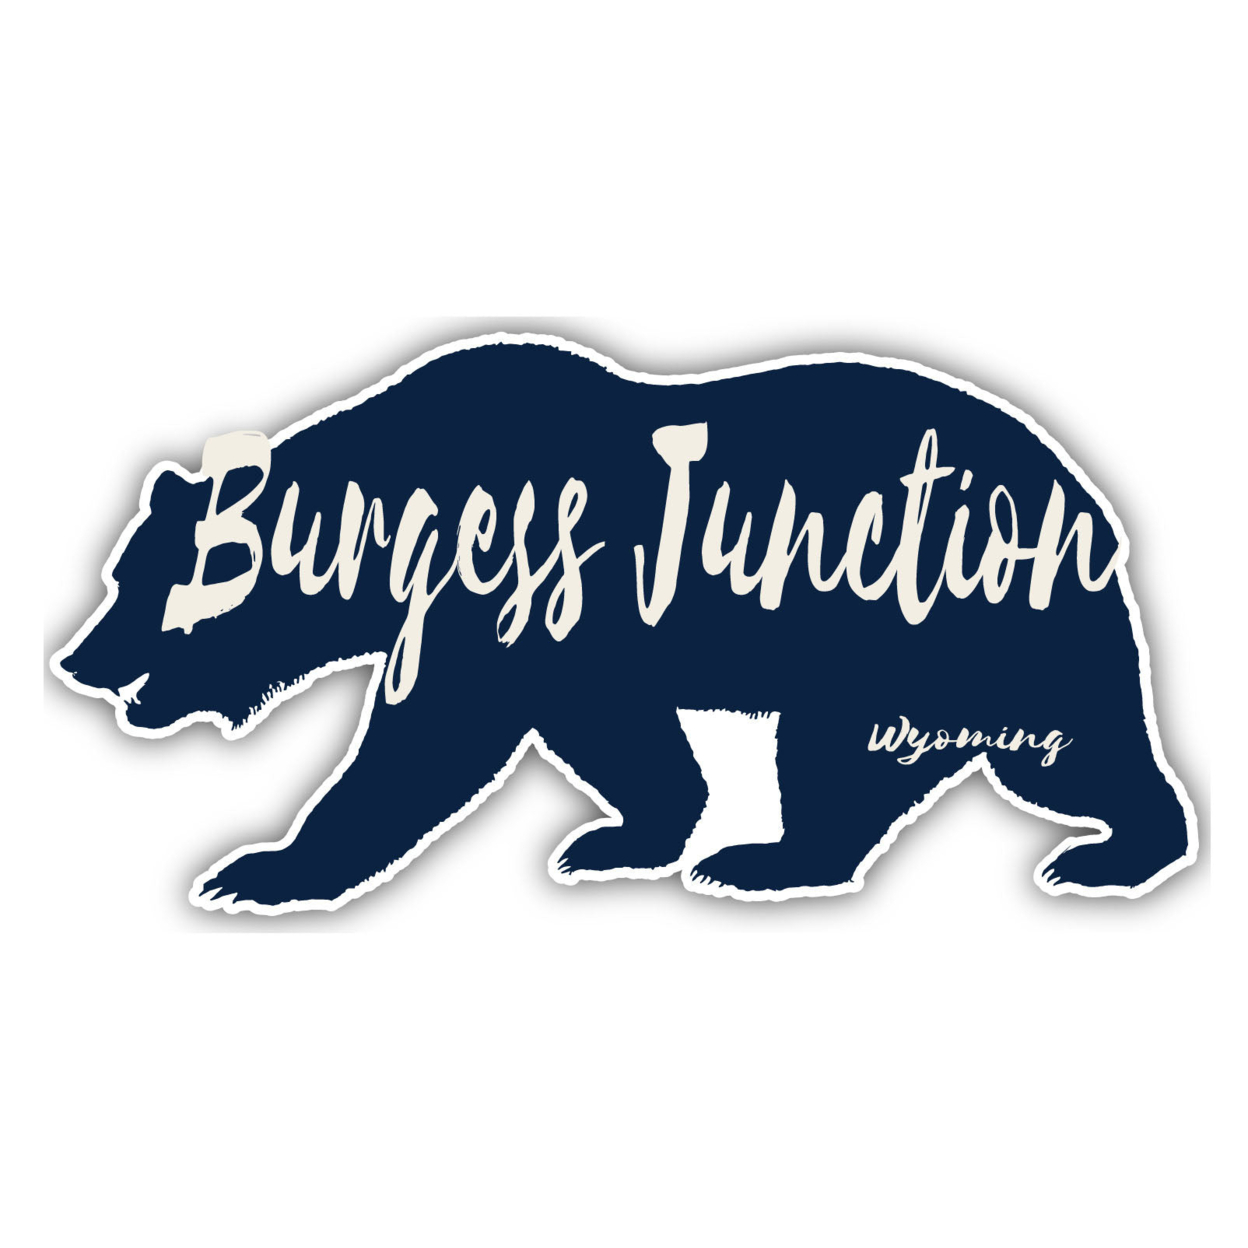 Burgess Junction Wyoming Souvenir Decorative Stickers (Choose Theme And Size) - Single Unit, 2-Inch, Bear